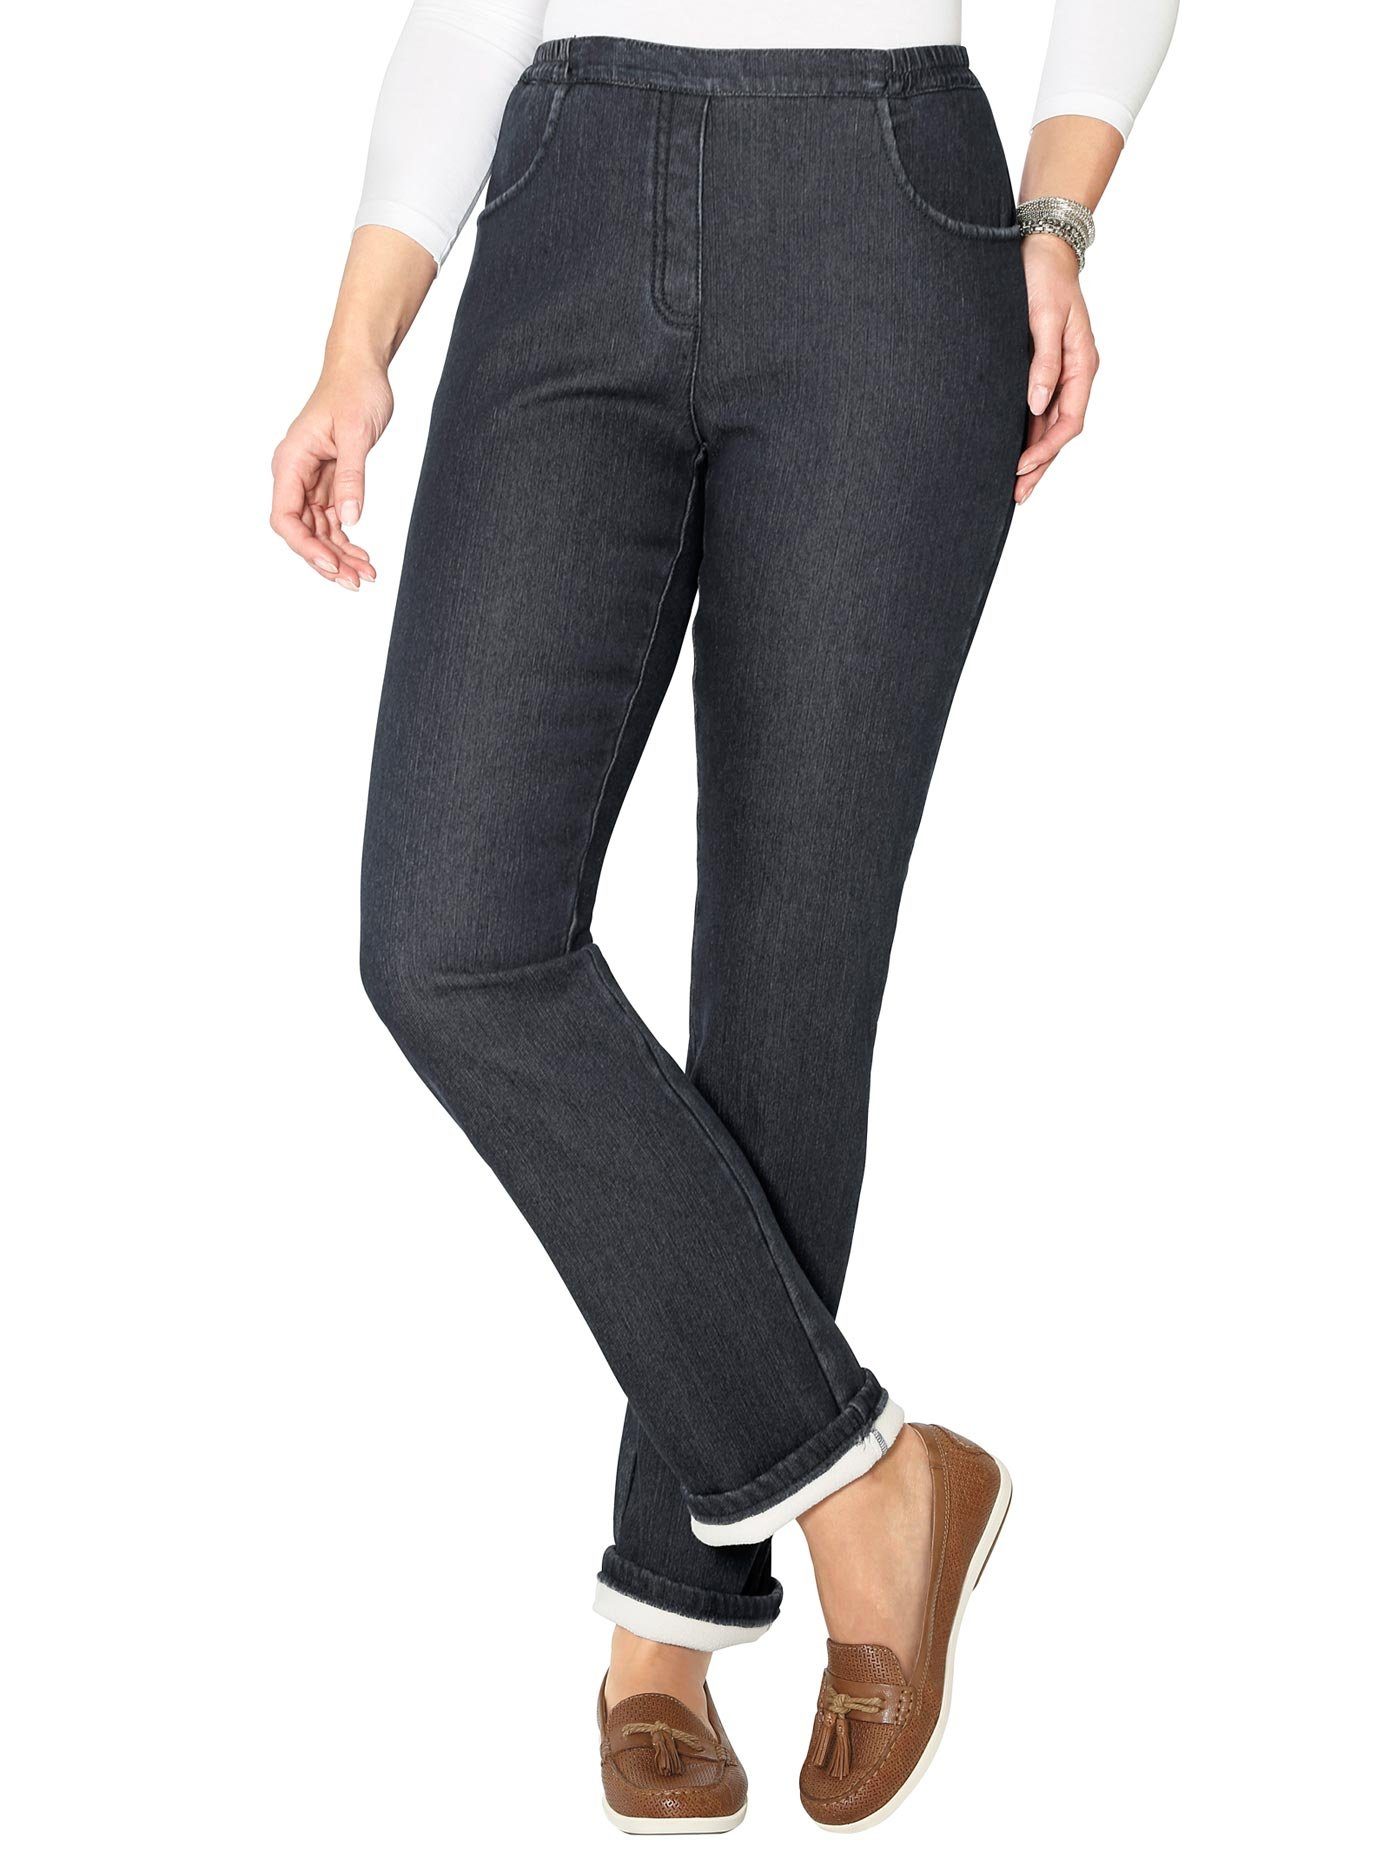 Classic Basics Thermojeans online | OTTO